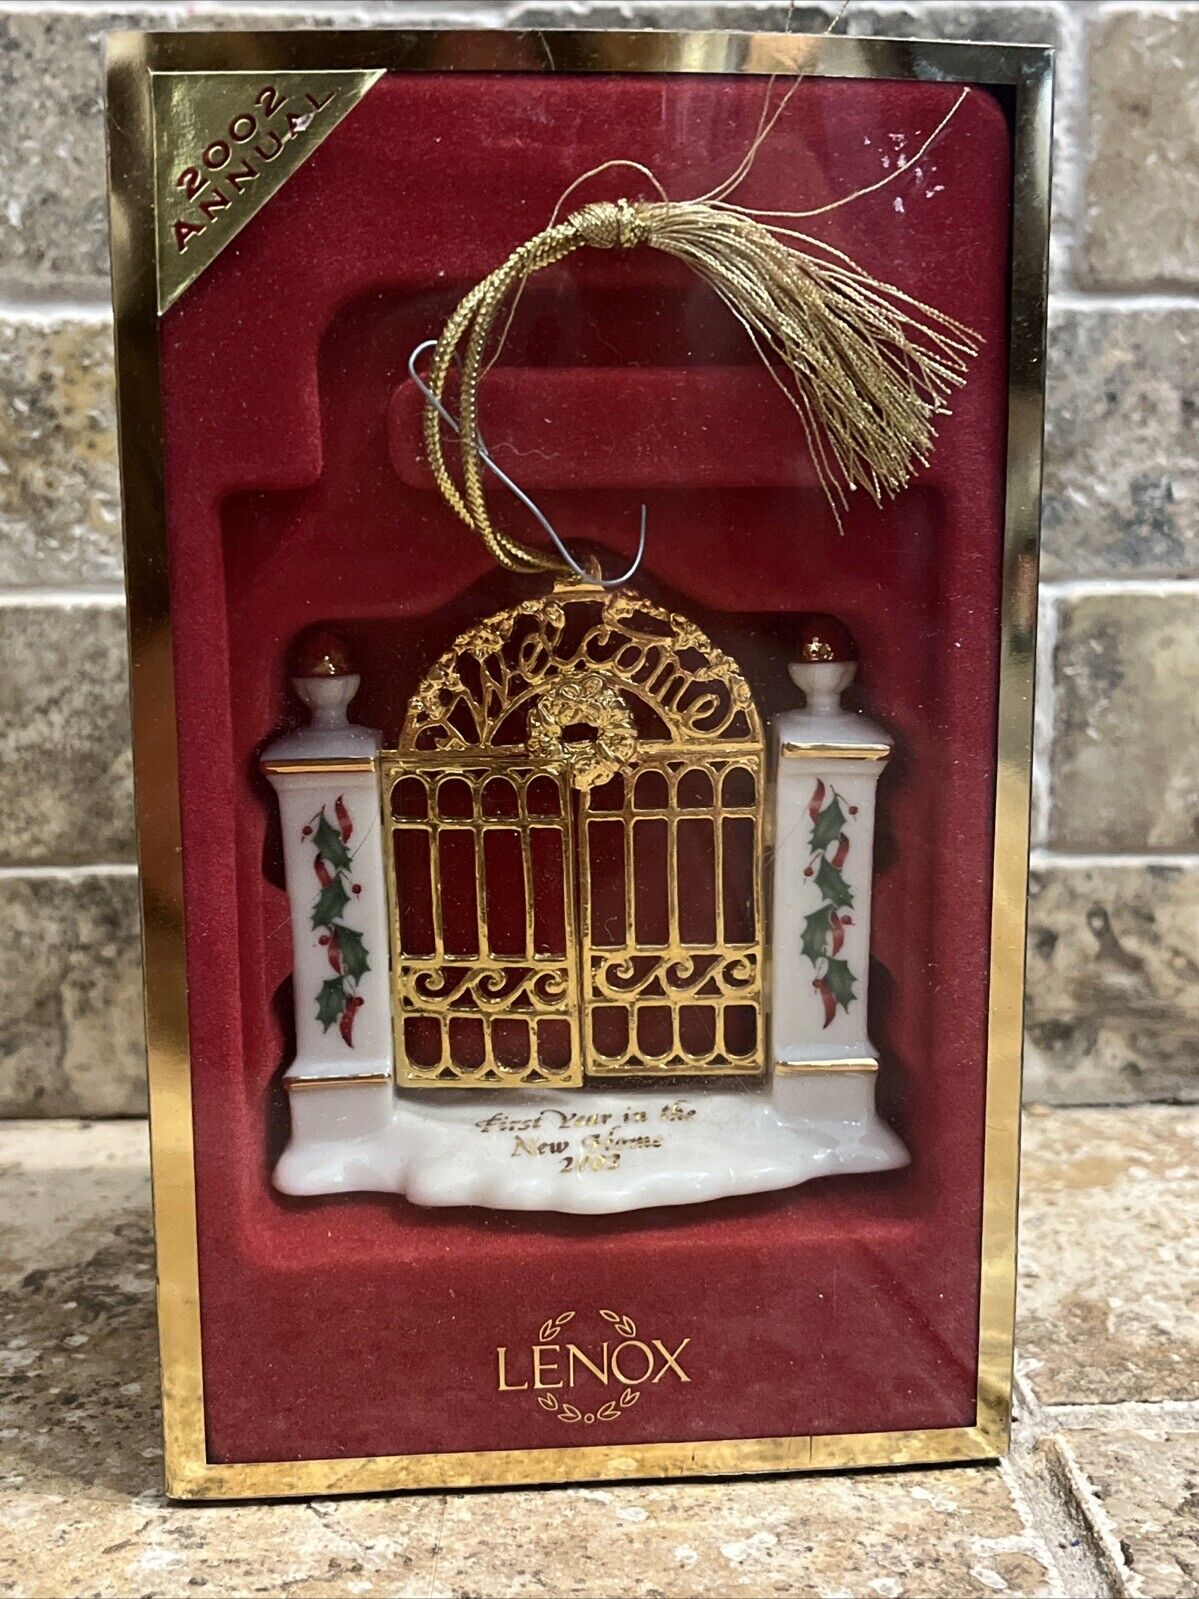 LENOX CHRISTMAS ORNAMENT FIRST YEAR IN THE NEW HOME 2002 HOLIDAYS DECORATION